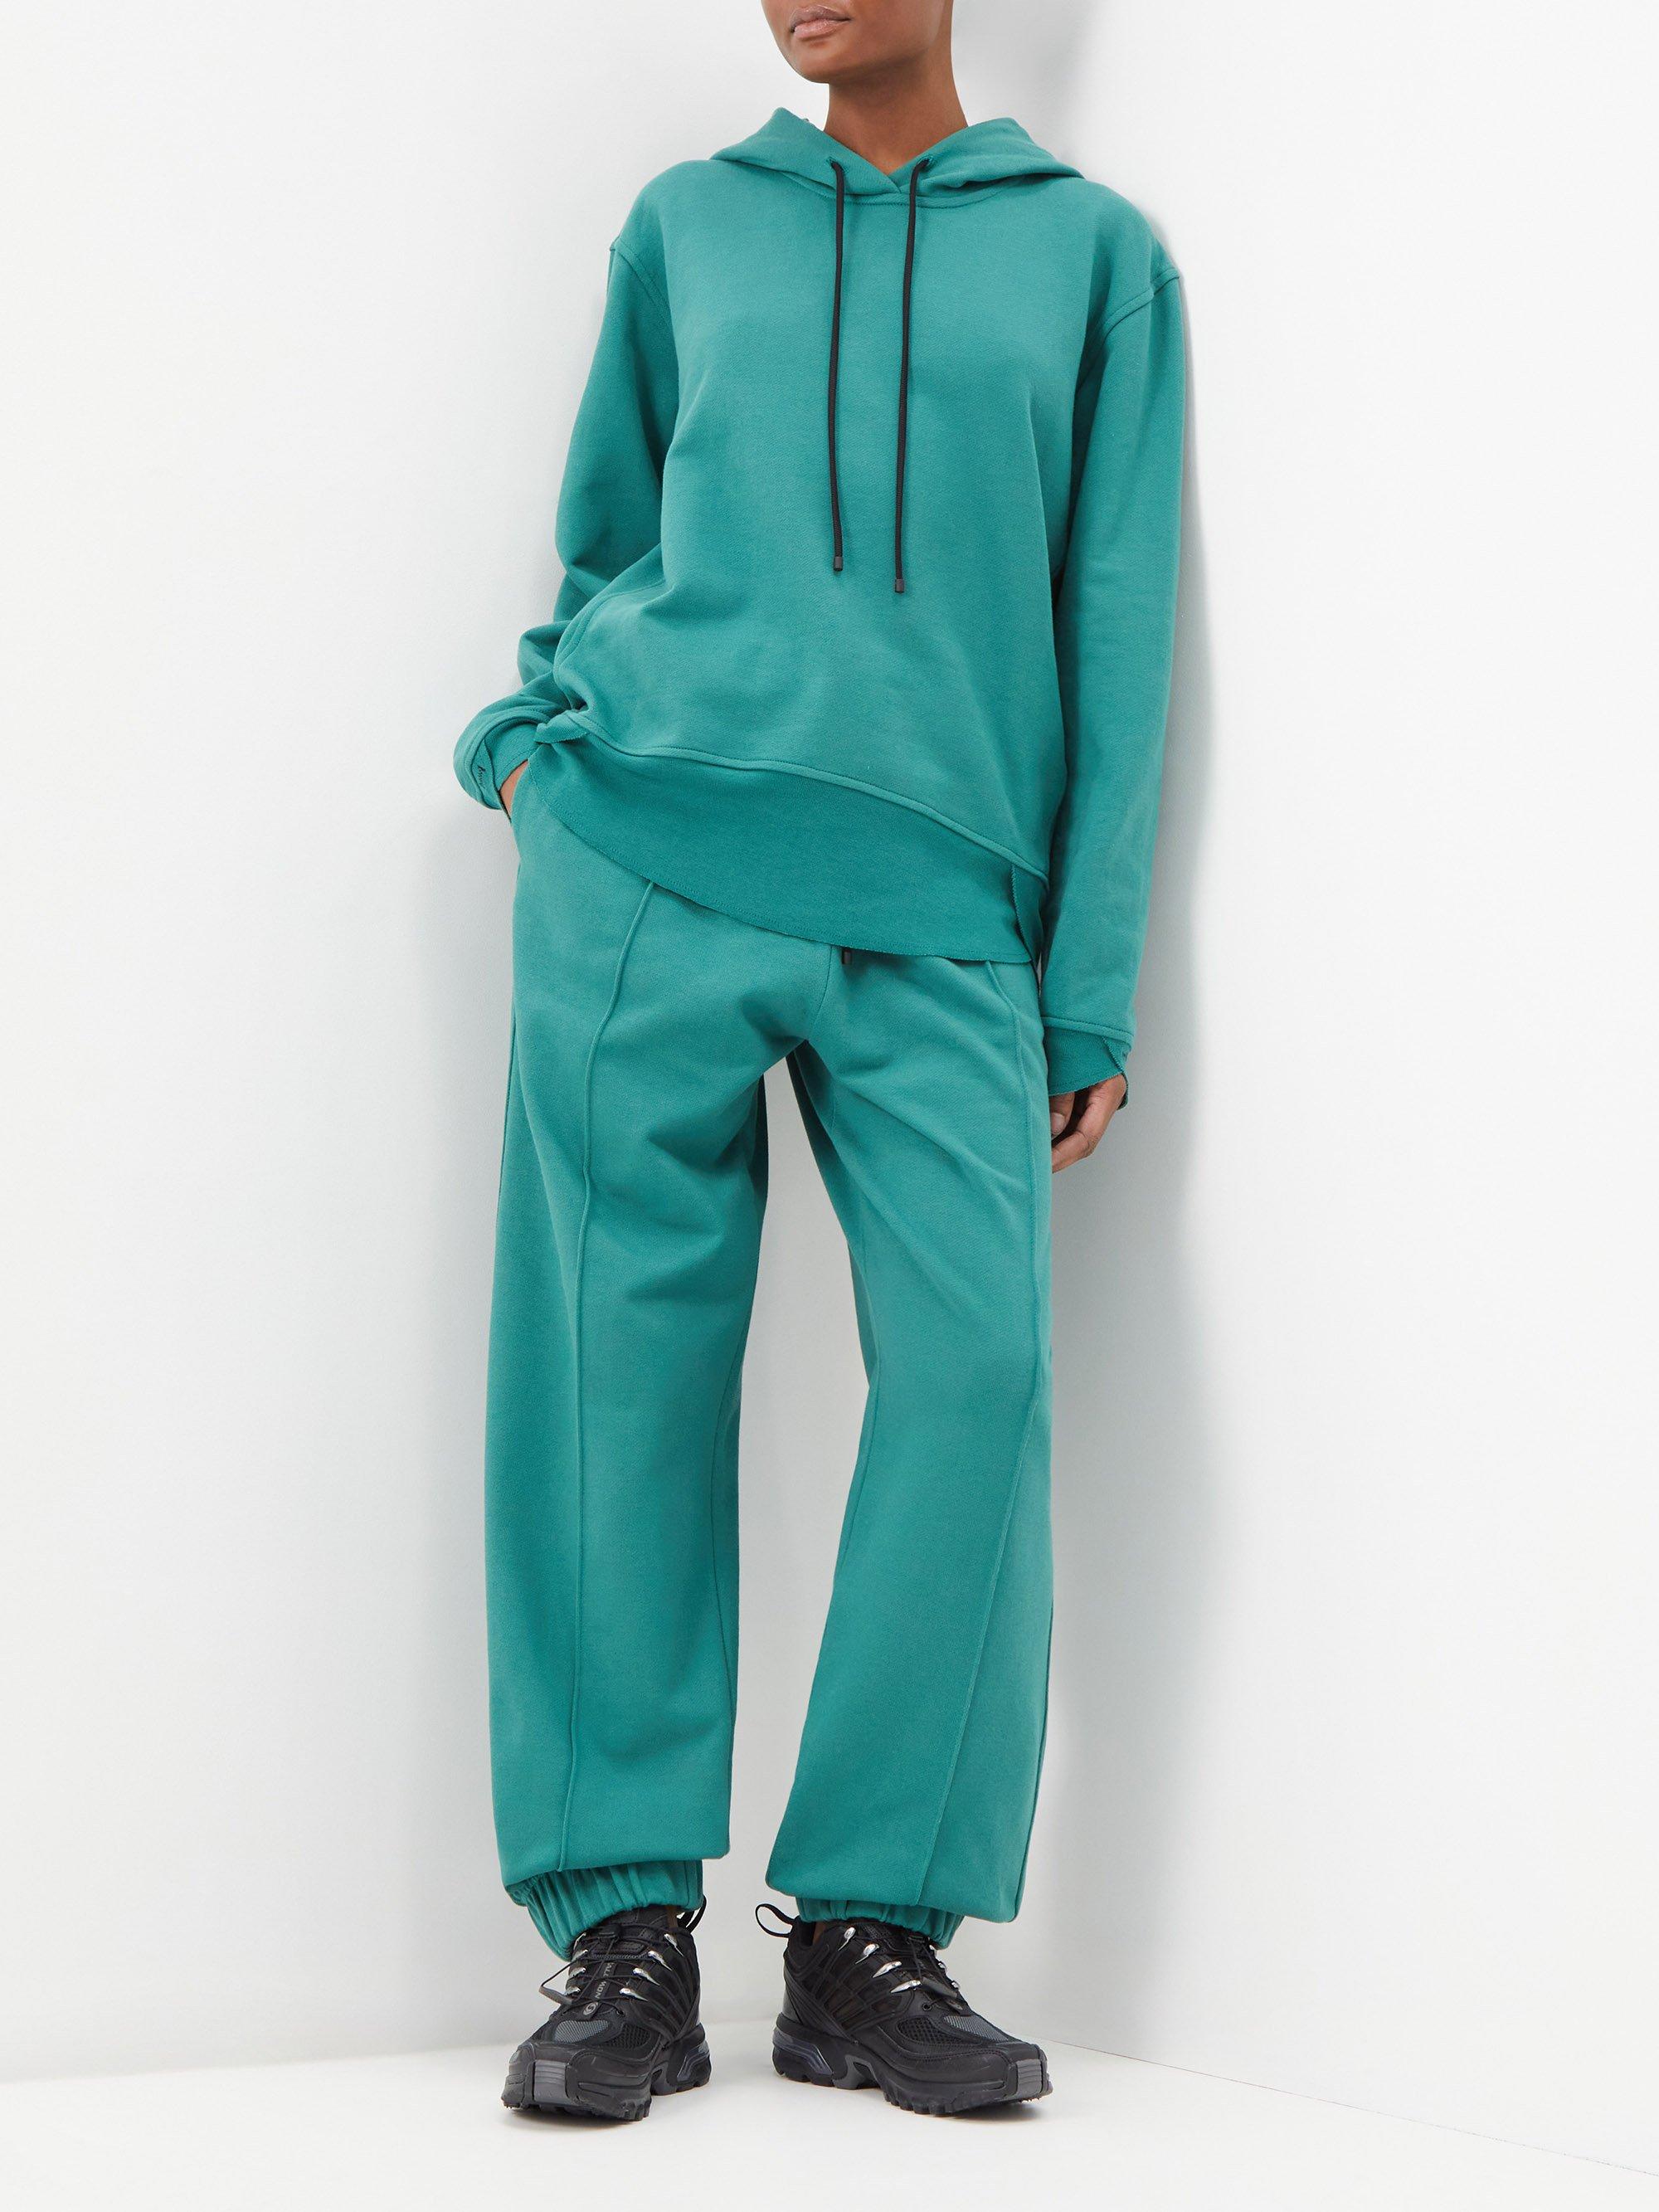 Moncler Genius X Alicia Keys Where Dreams Are Made Of Sweatshirt in Green |  Lyst